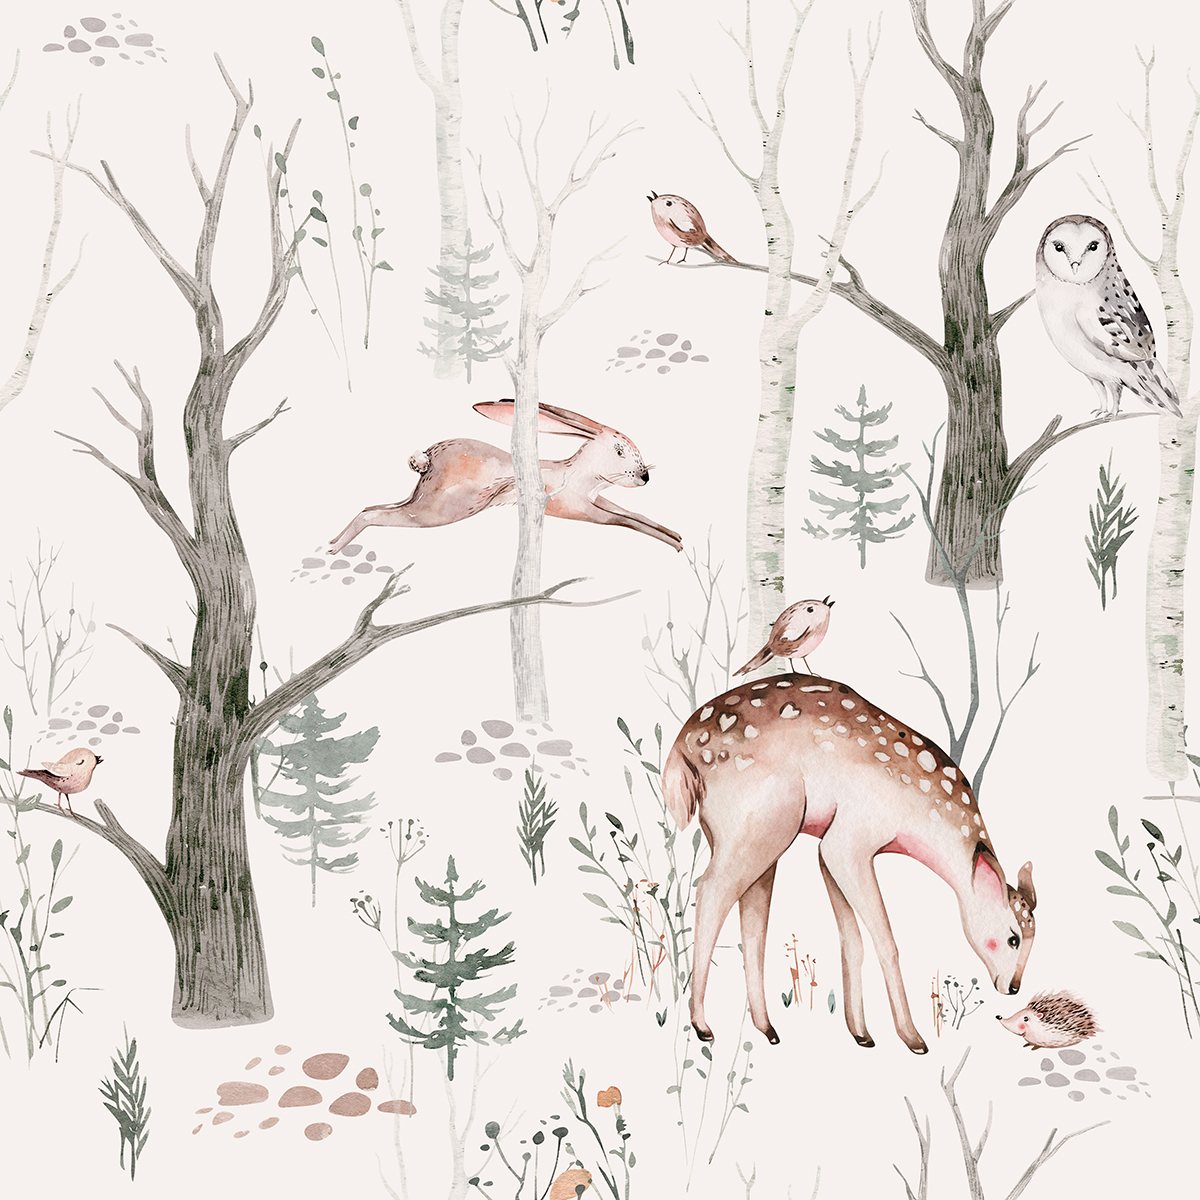 A pattern of animals in the woods